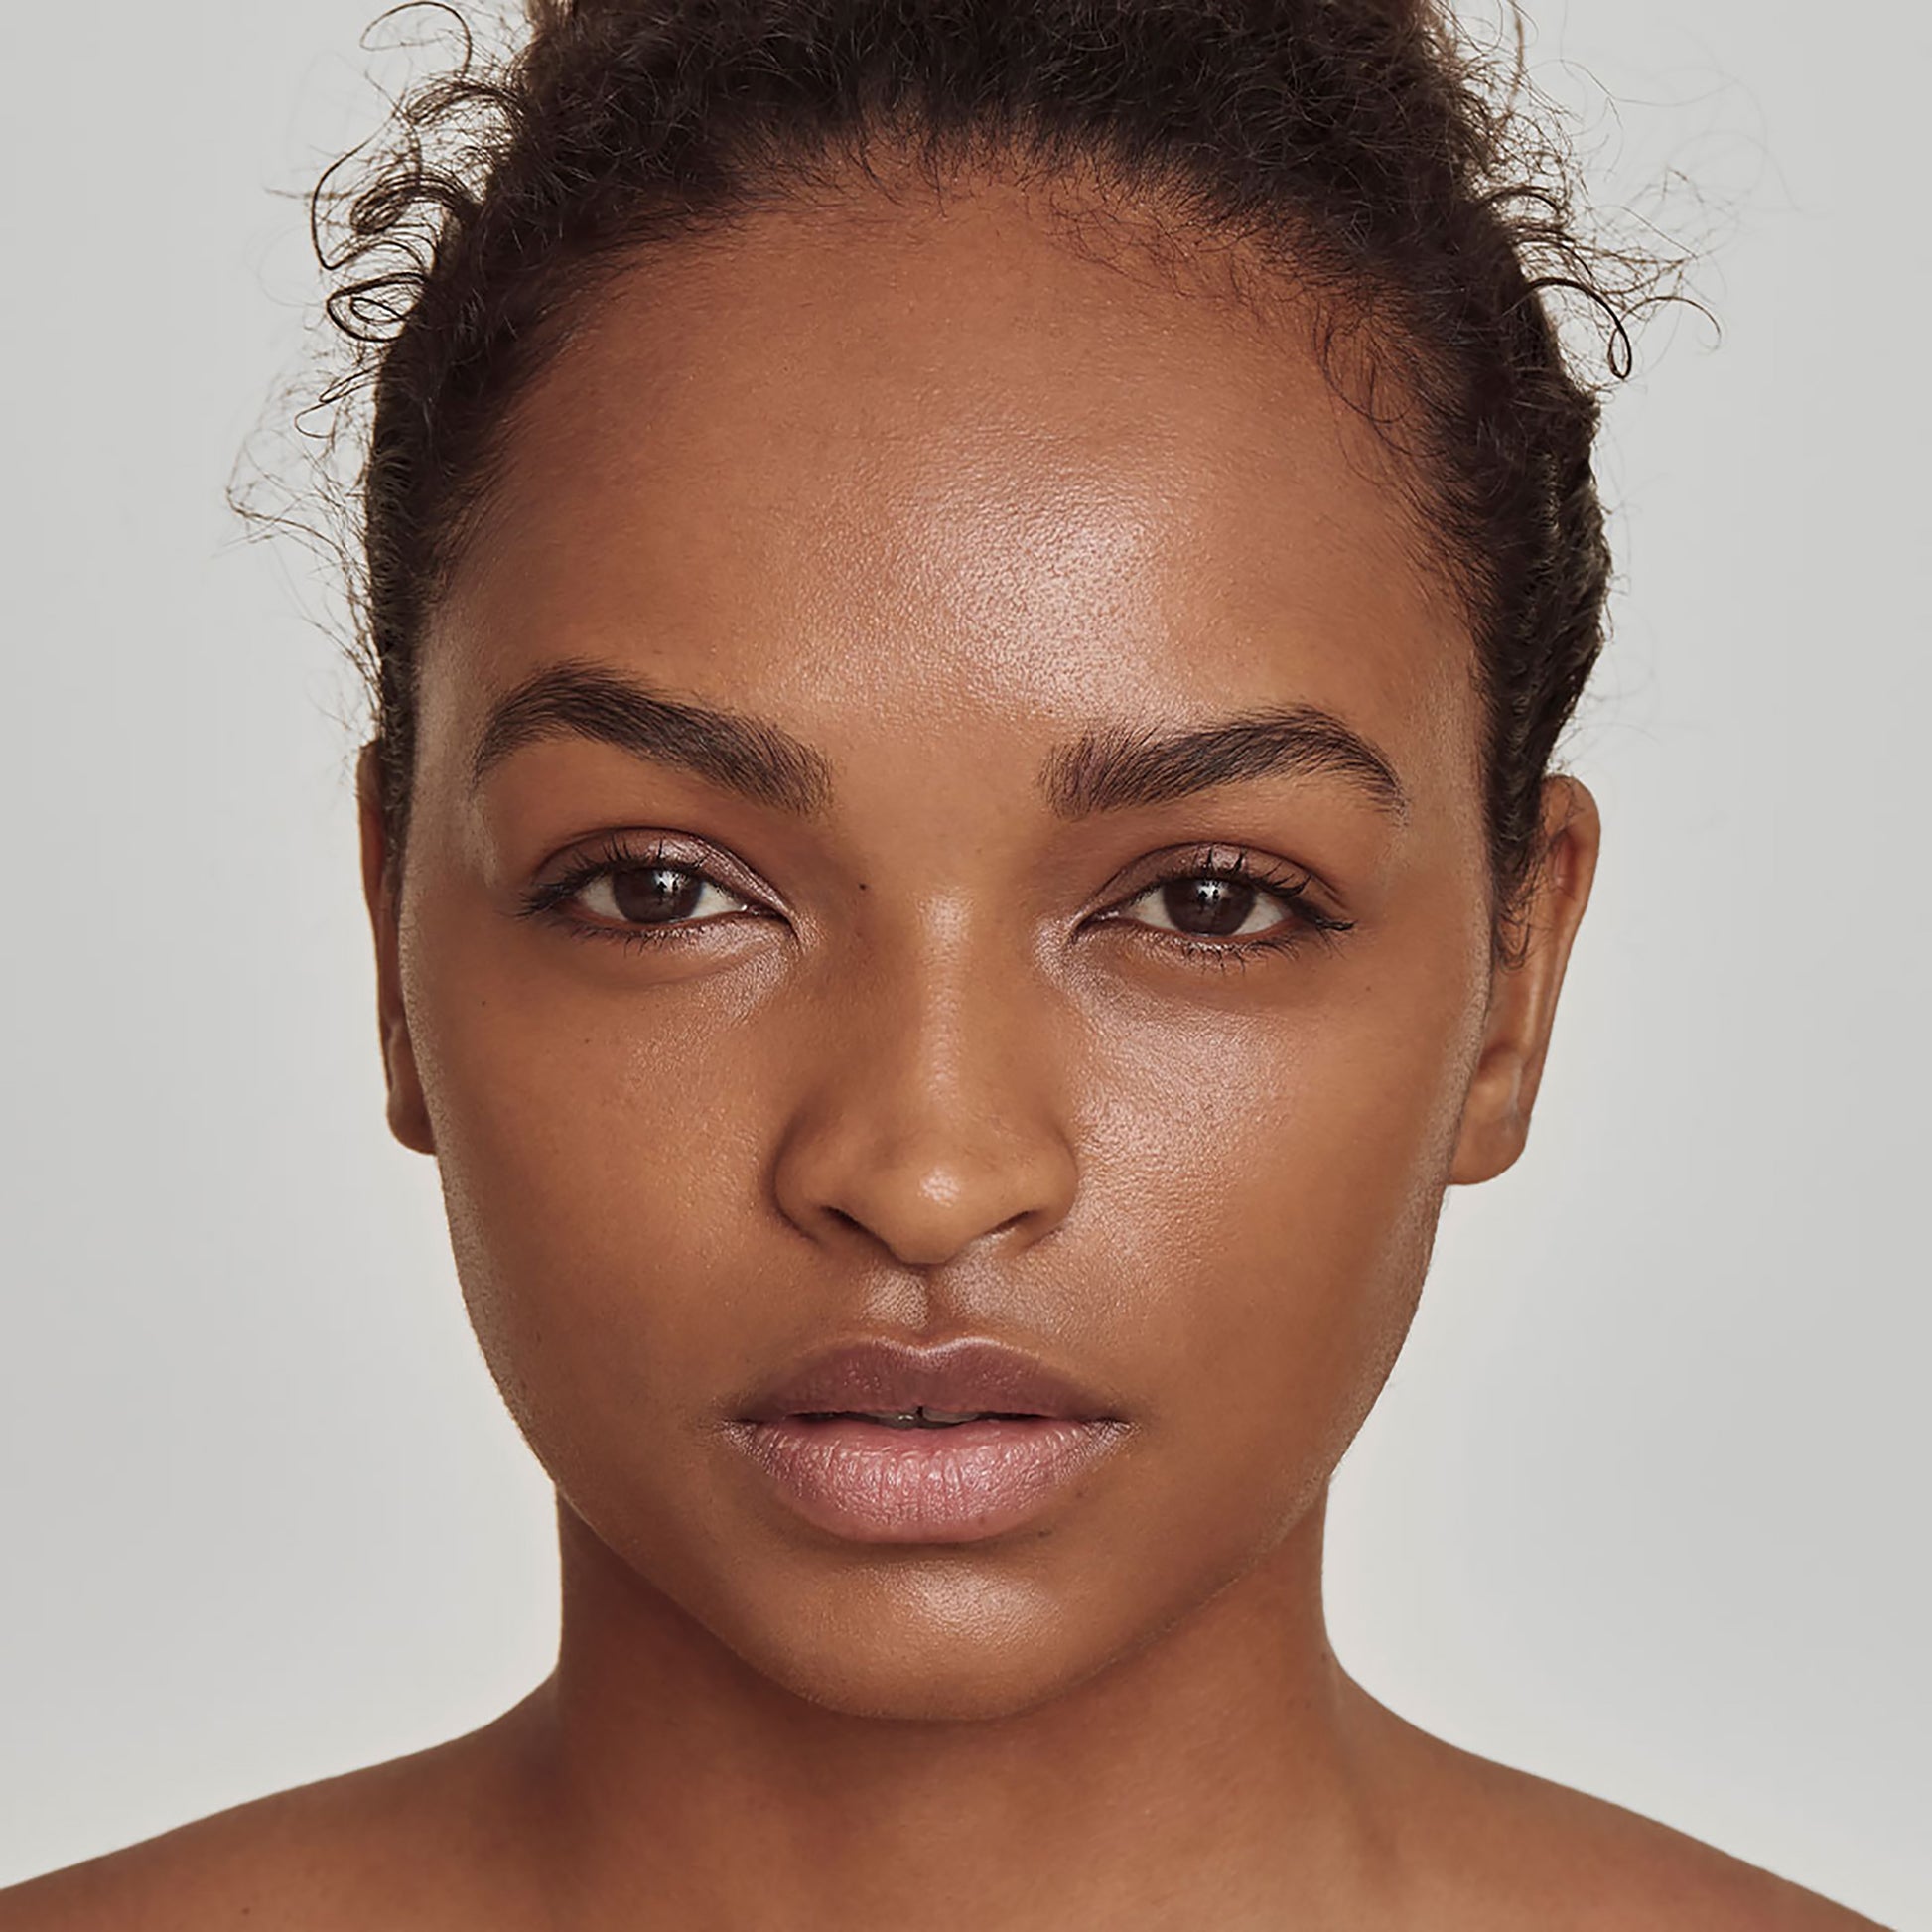 Close up of a person’s face with deep warm-toned skin